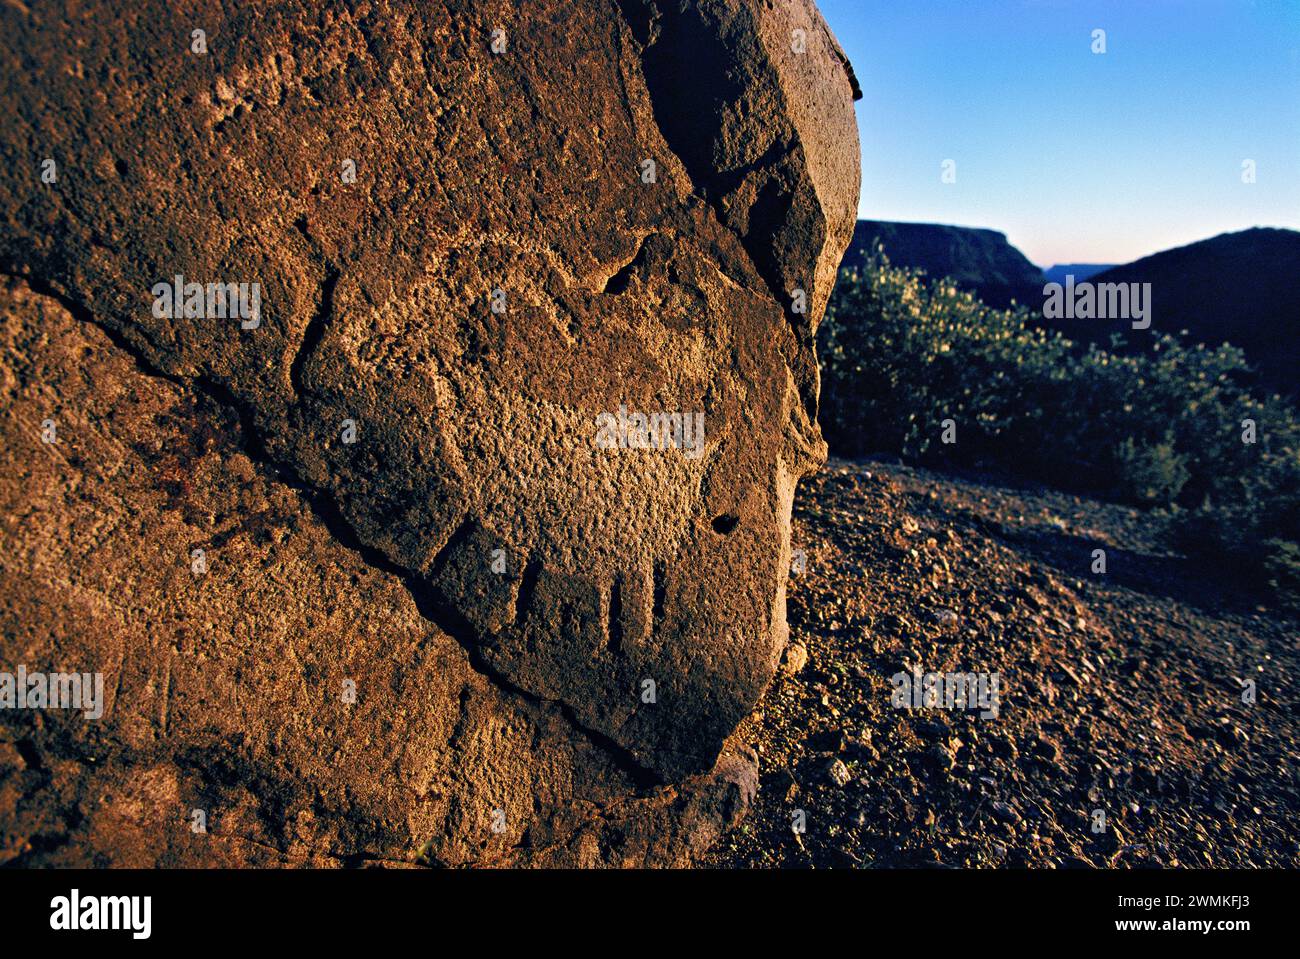 Petroglyph of a horned animal carved onto a rock face. Significant late prehistoric archeological sites in the desert Southwest are preserved in Ag... Stock Photo